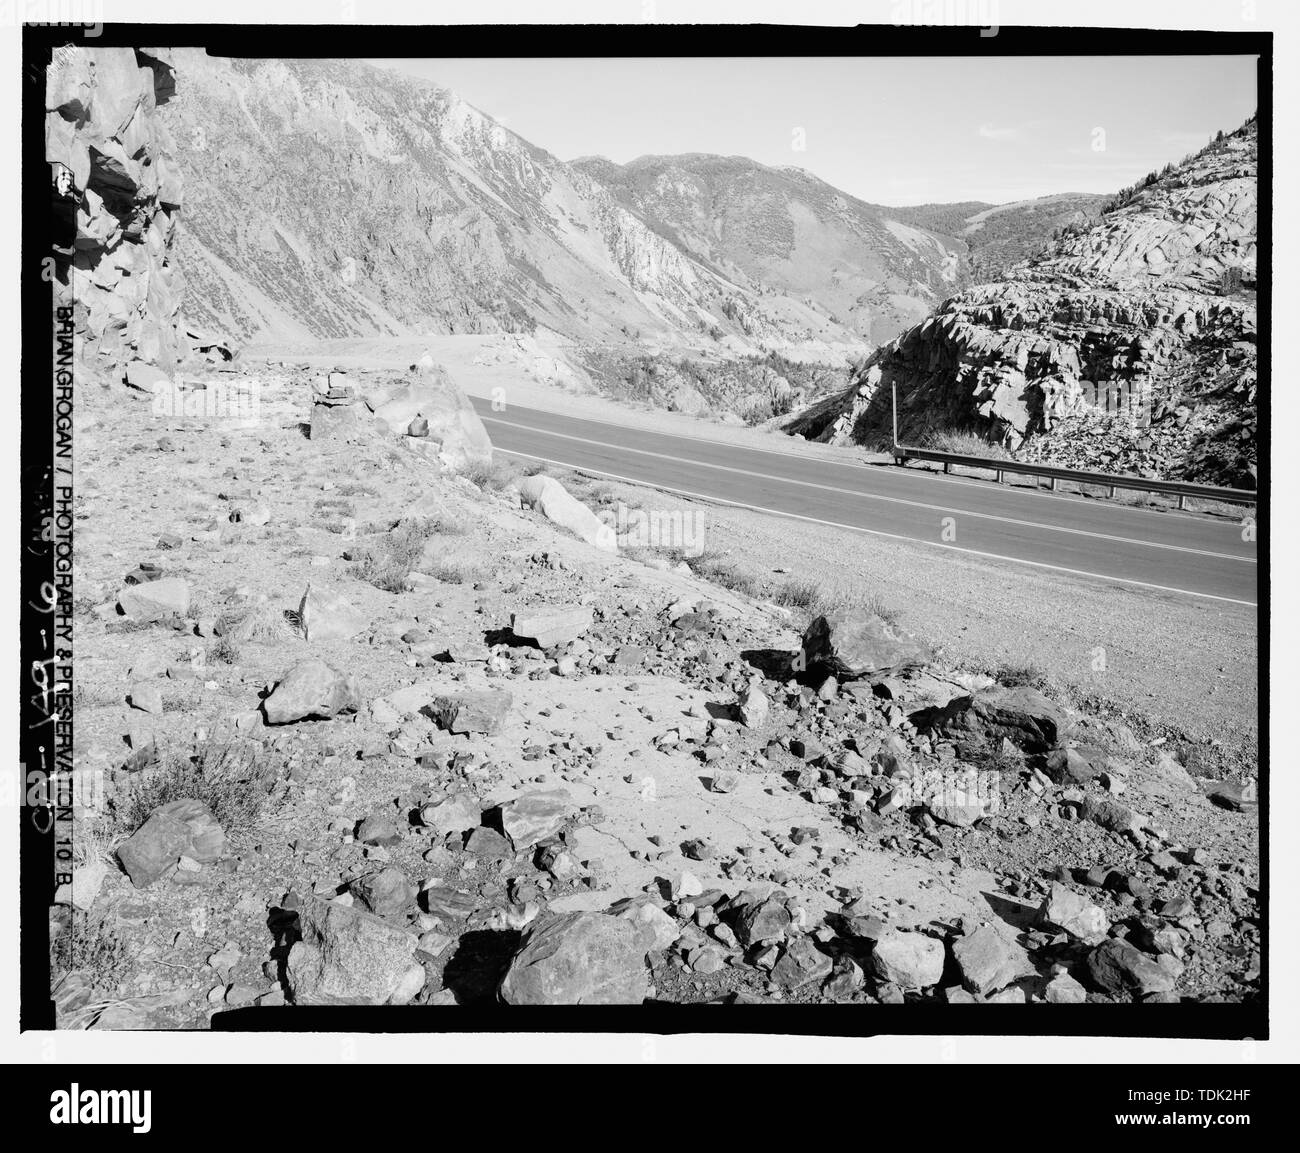 OLD AND NEW TIOGA ROAD. NOTE REMNANTS OF OLD ROAD ON LEFT. NOTE ROAD CUT ON CANYON WALL IN CENTER REAR. LOOKING NNE. GIS- N-37 56 19.5 - W-119 13 53.3 - Tioga Road, Between Crane Flat and Tioga Pass, Yosemite Village, Mariposa County, CA Stock Photo